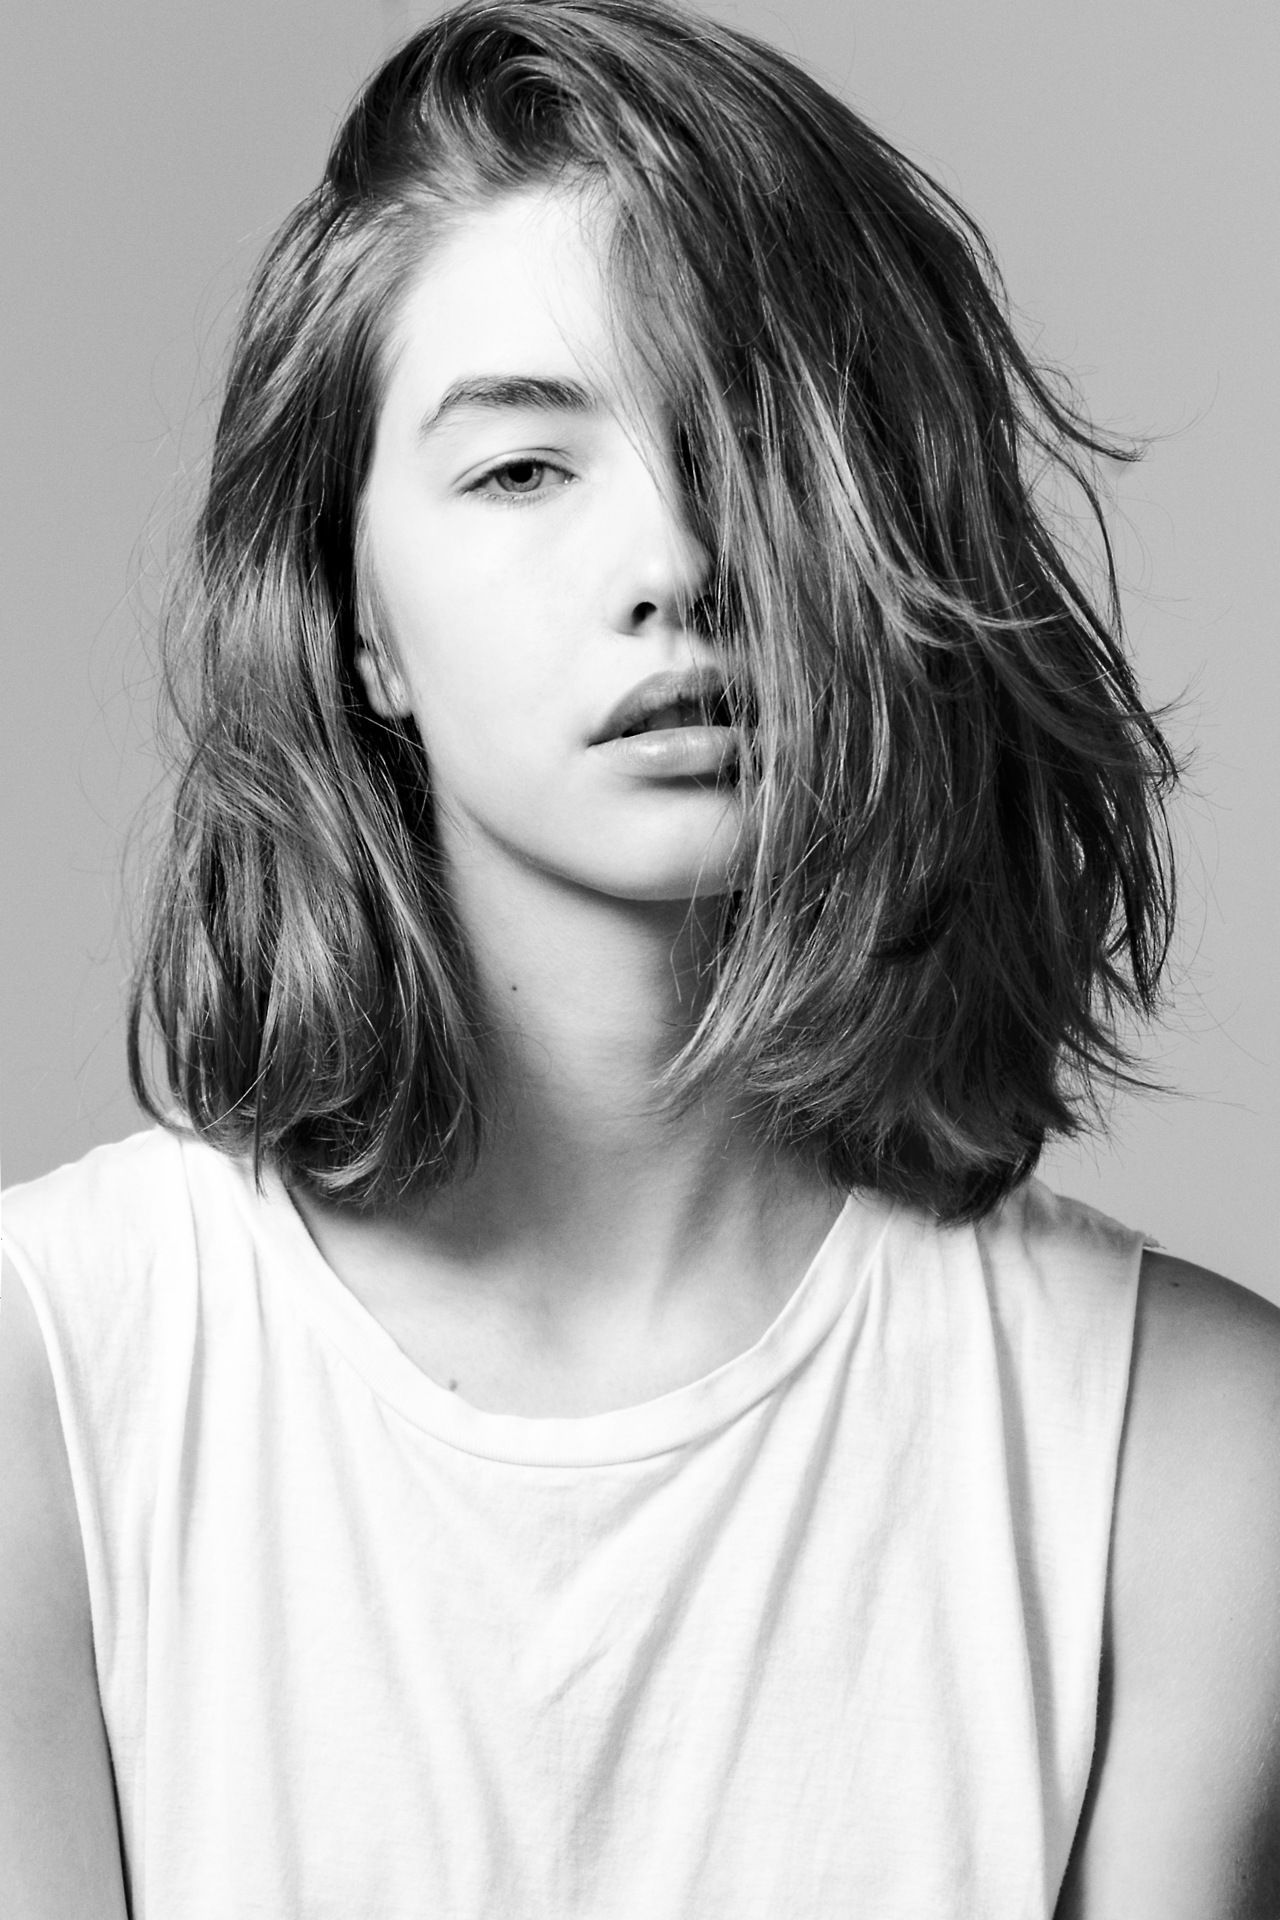 Length + Side Part #bob #longbob #hair | Hair | Pinterest | Bobs Throughout Side Parted Messy Bob Hairstyles For Wavy Hair (View 11 of 20)